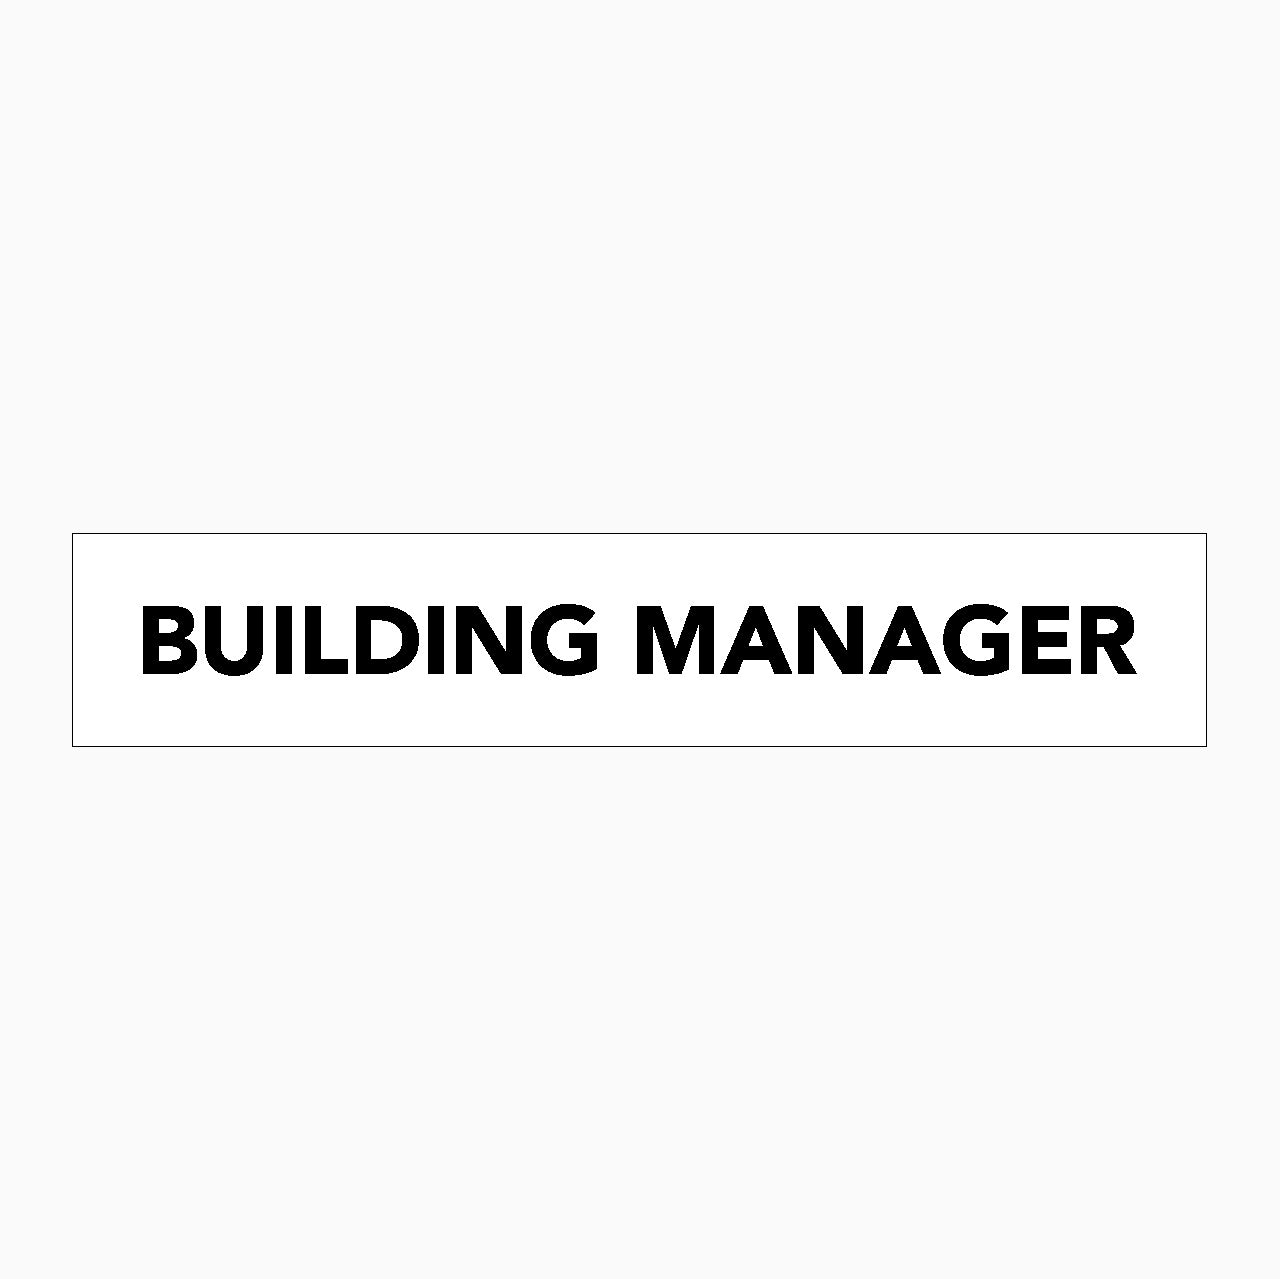 BUILDING MANAGER SIGN